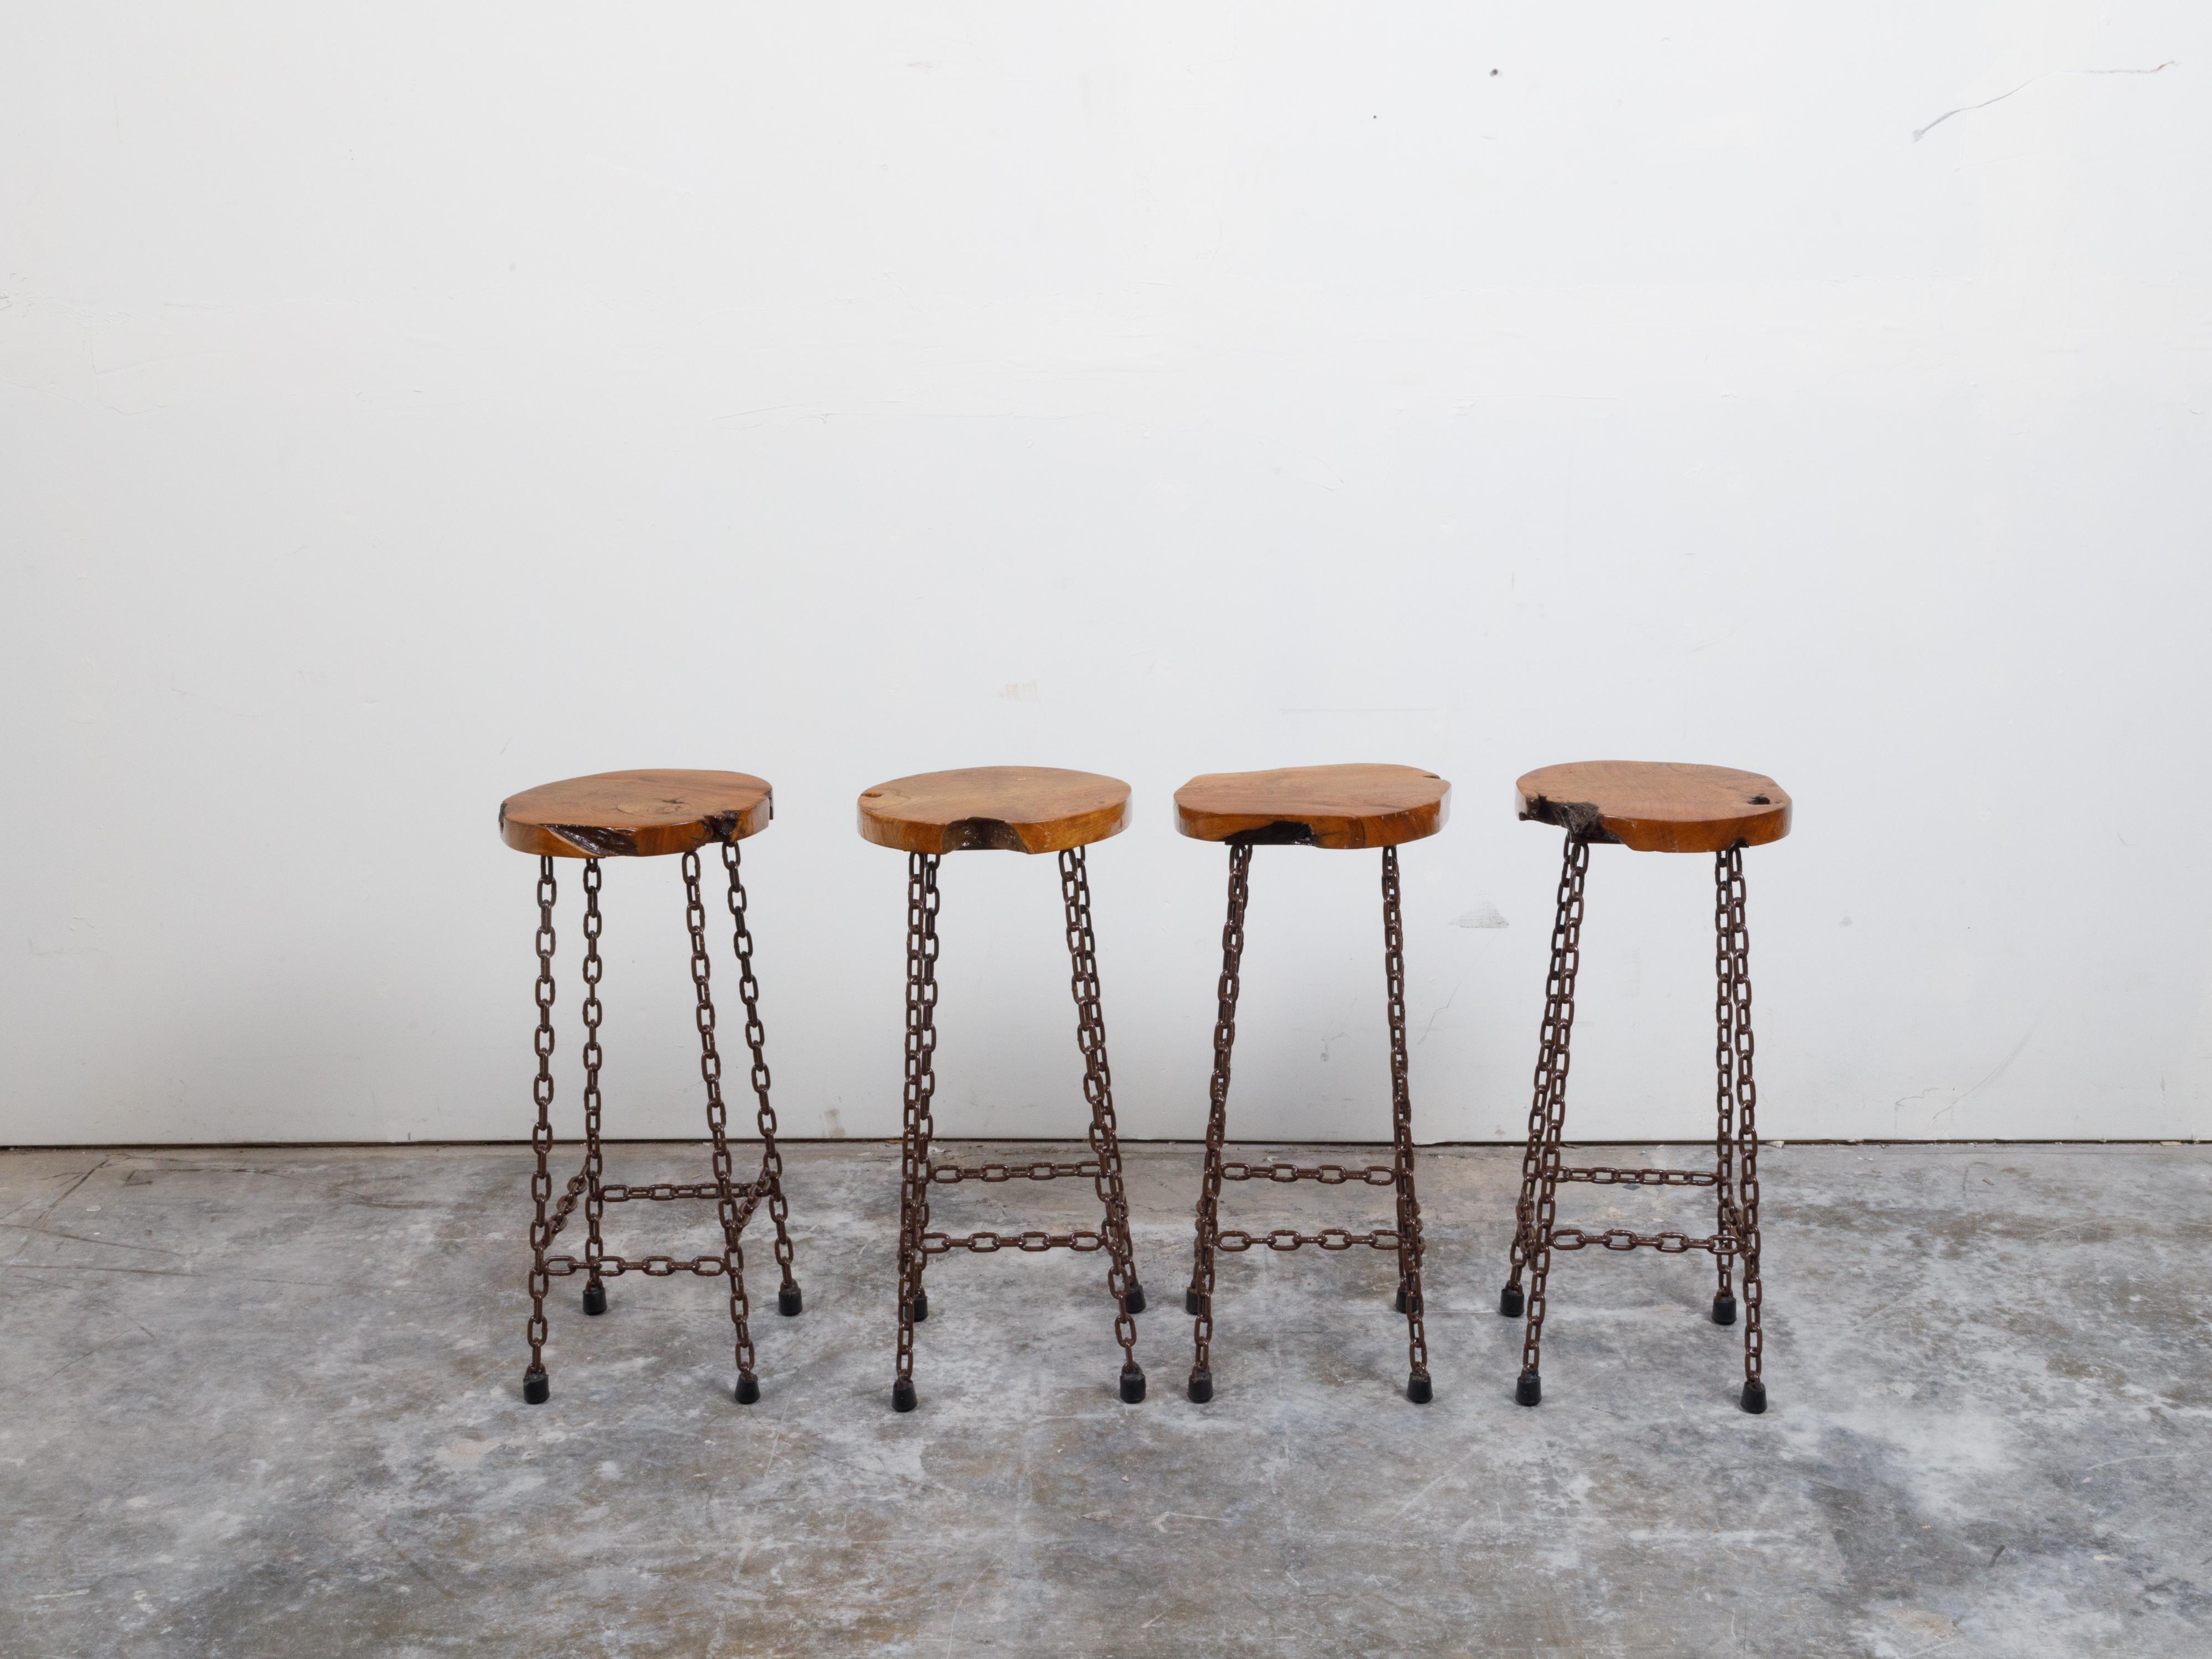 Four American chain stools from the 20th century with wood slab seats, priced and sold $1,125 each. Made in the USA during the 20th century, these stools each feature an irregular wood slab seat resting on four chain legs connected to one another